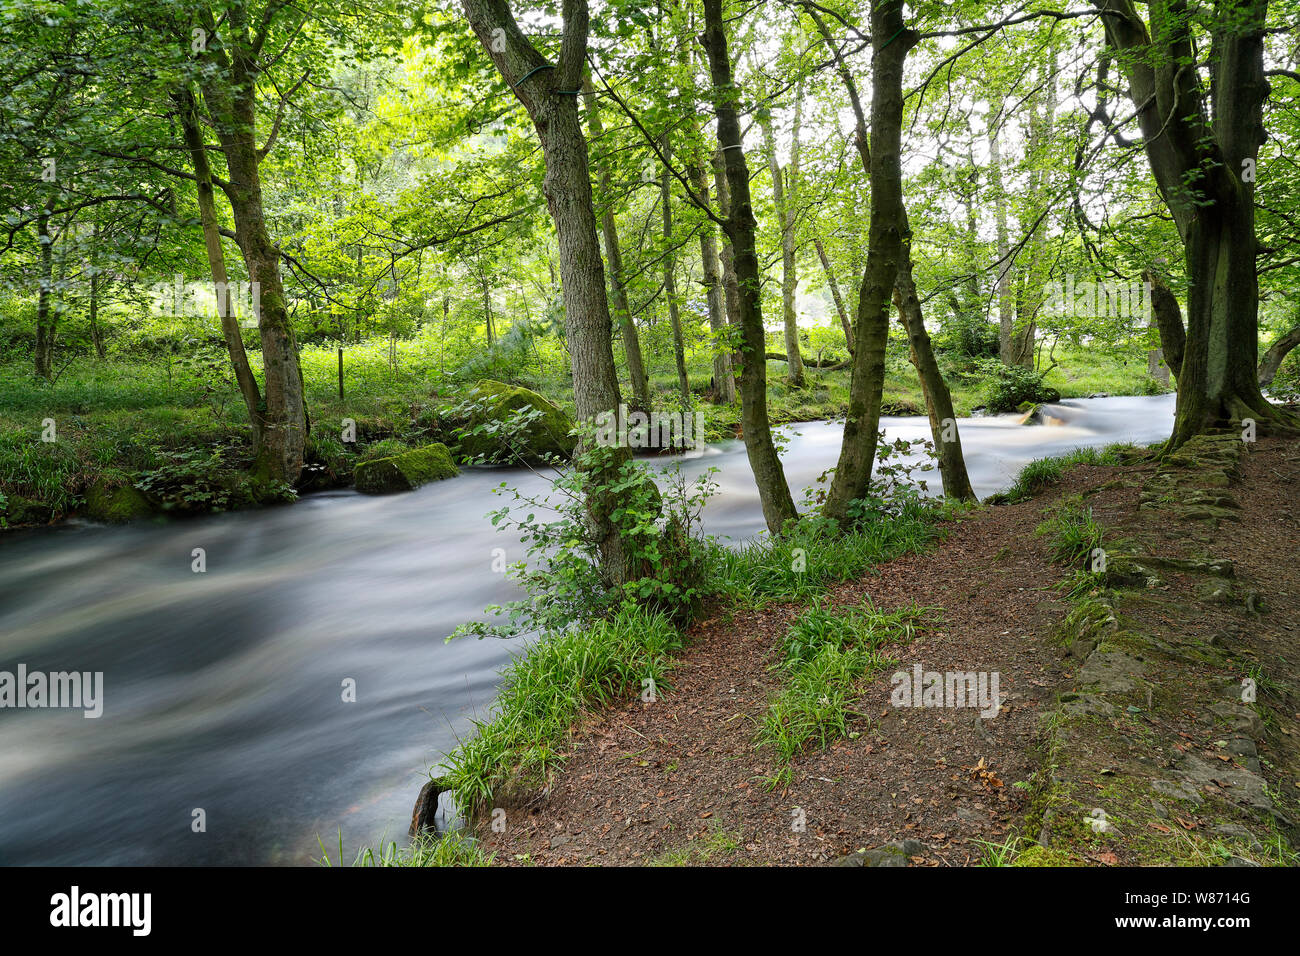 The River Washburn in Nidderdale showing fast flowing water due to water release from Thruscross reservoir by Yorkshire Water Company for canoeing Stock Photo